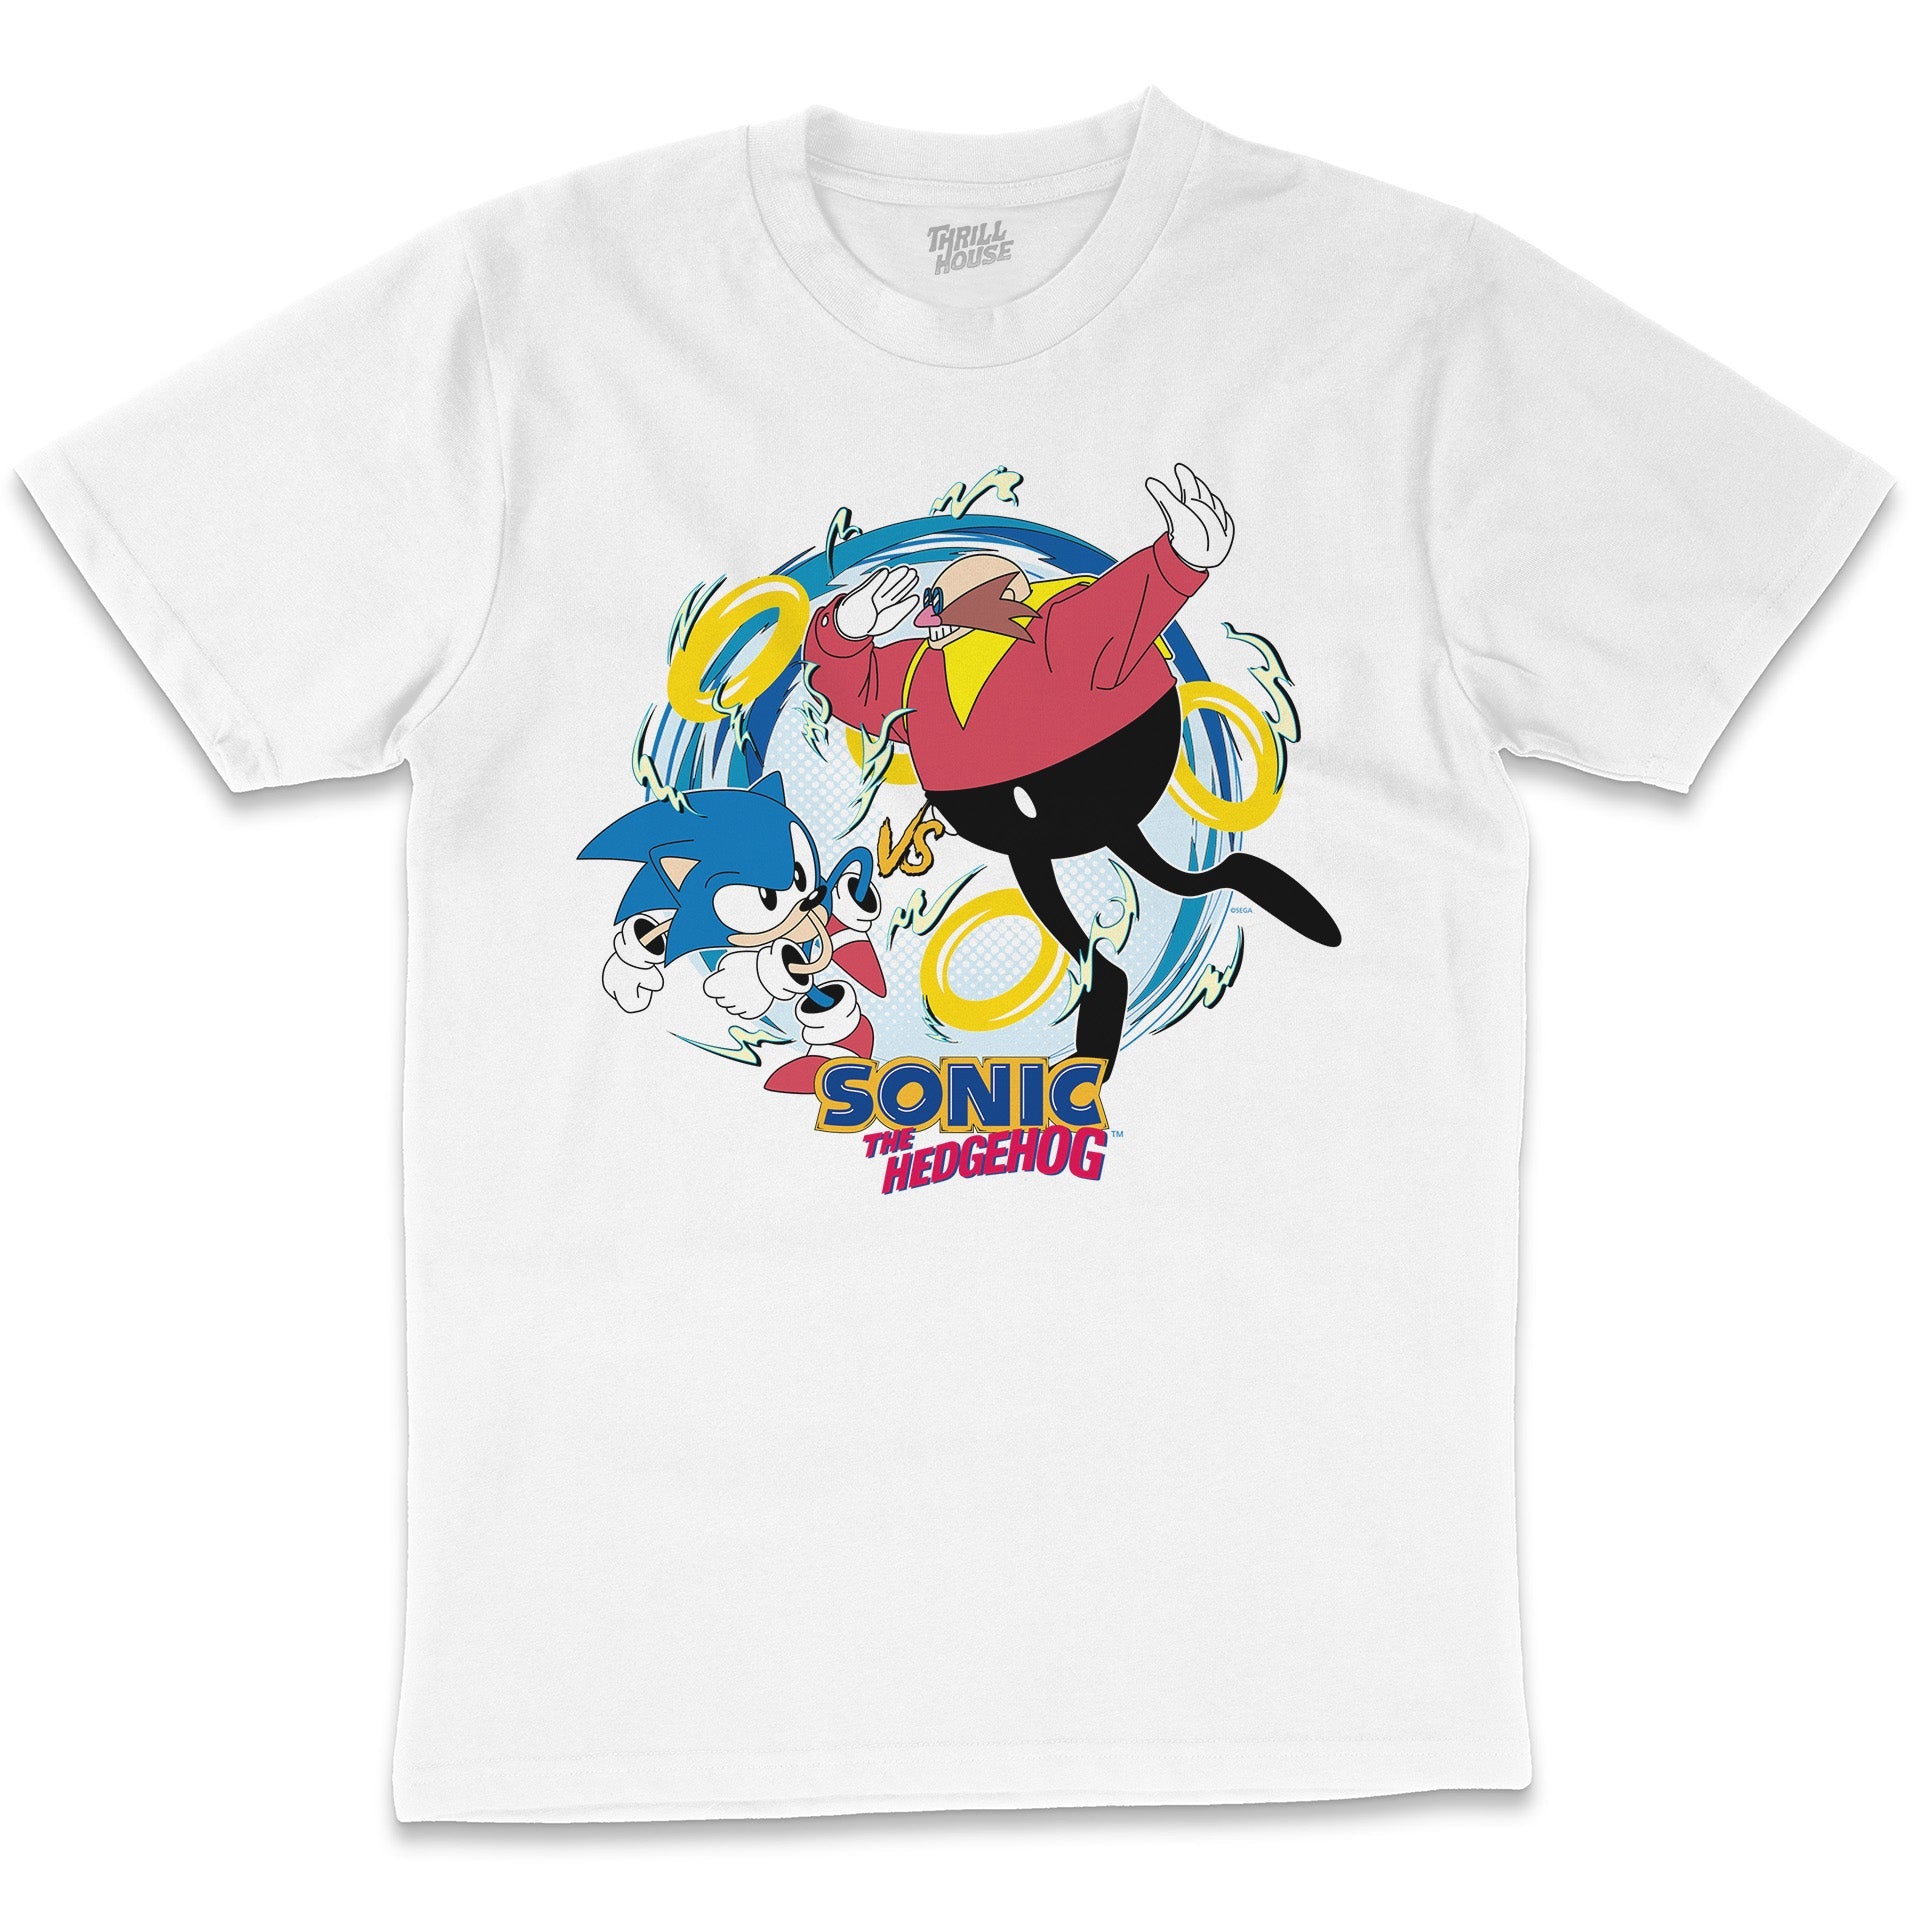 Sonic The Hedgehog vs Dr Eggman 90s Video Game Cartridge Console Officially Licensed SEGA T-Shirt